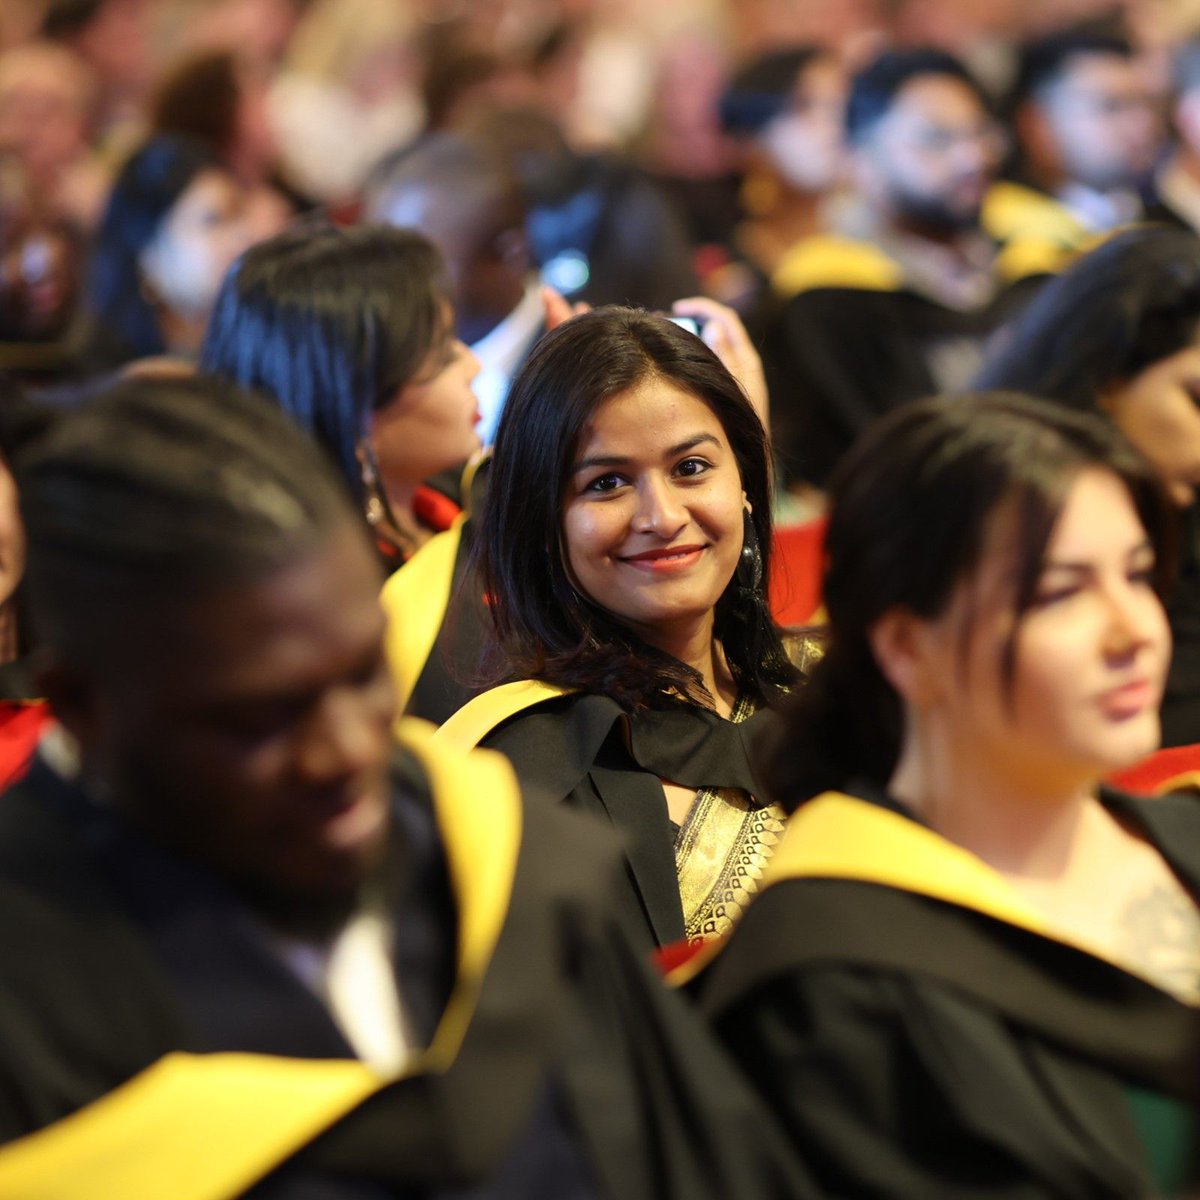 Did you graduate between Aug-Oct 2022? If so, you can complete the Graduate Outcomes Survey! The survey gives us insight into career paths that our graduates take, and will help us shape our courses for the future. Look out for your unique URL sent via email or text message.